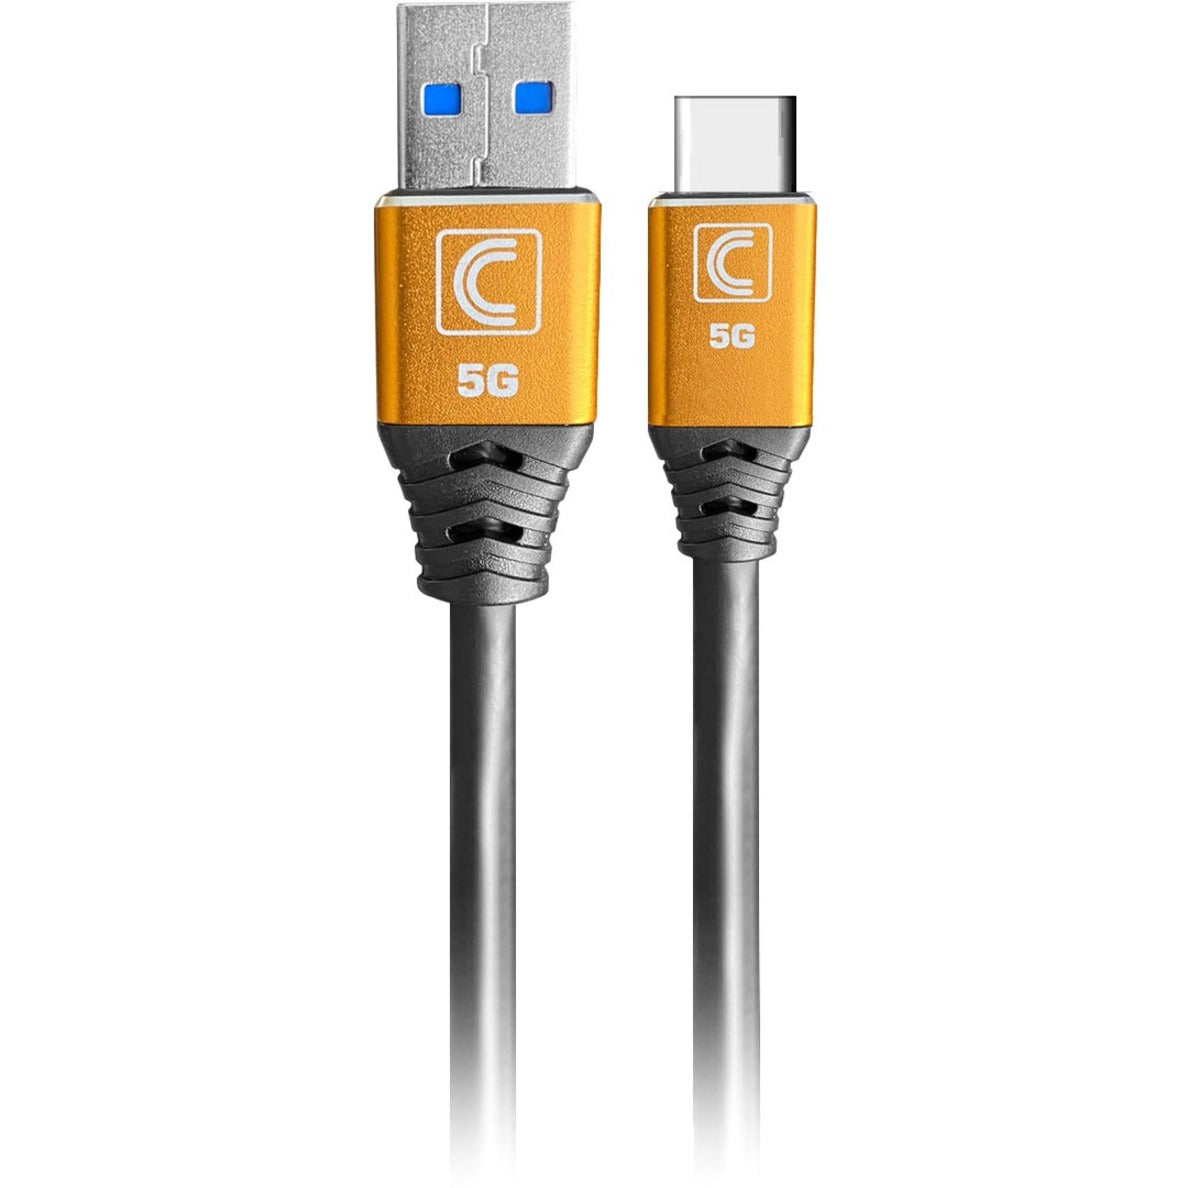 Comprehensive USB3-AC-15SP Pro AV/IT Specialist Series USB 3.0 (3.2 Gen1) 5G A Male to C Male Cable 15ft Strain Relief Bendable Triple Shielded